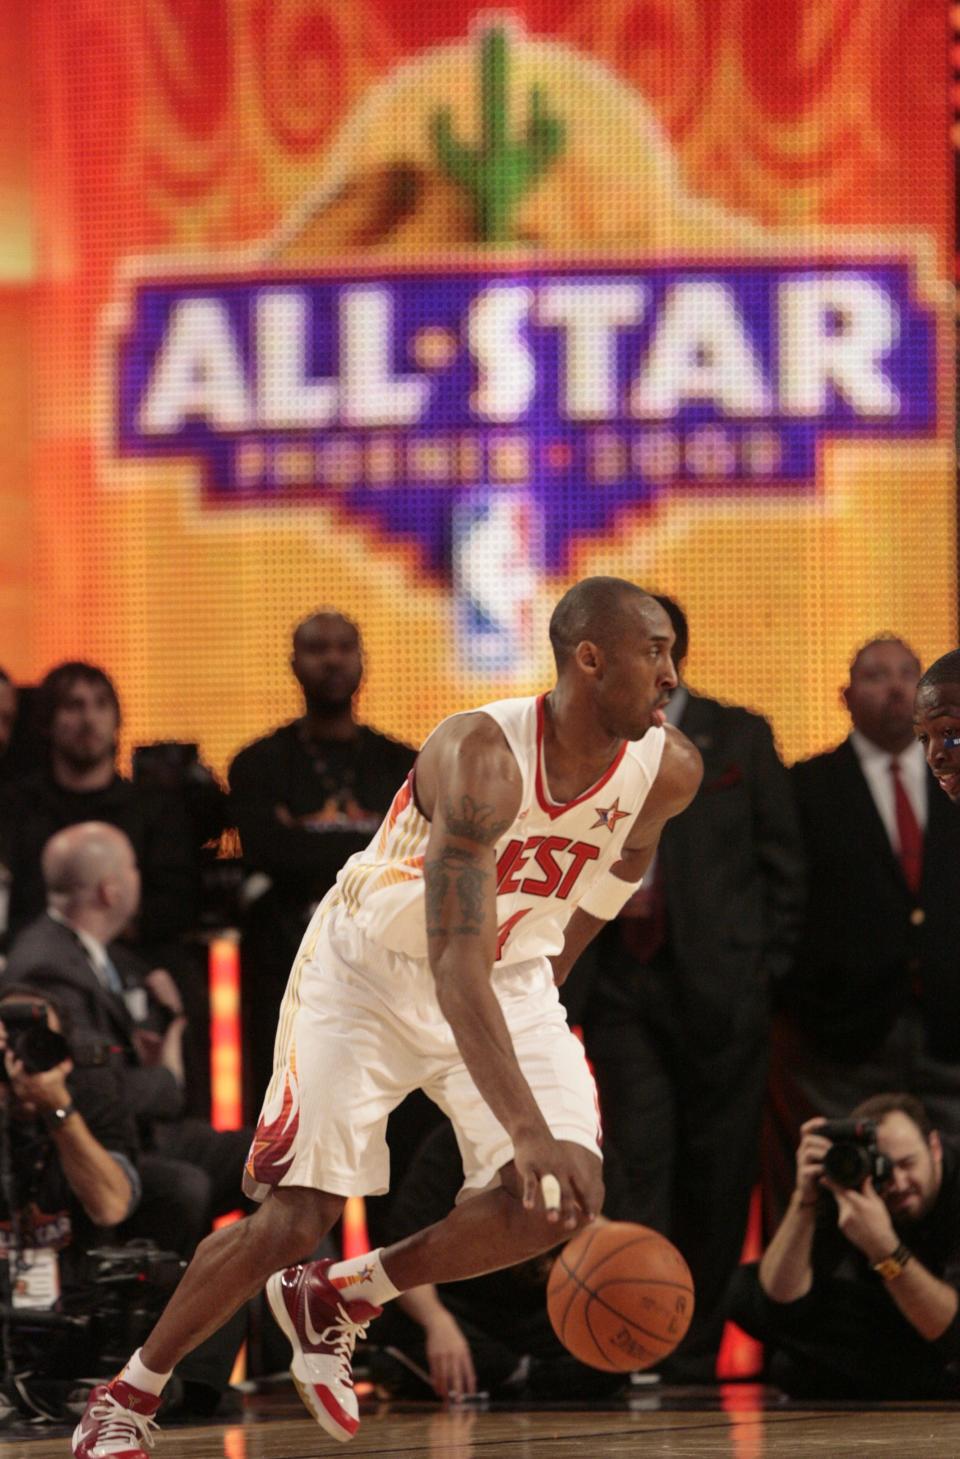 Phoenix last held the NBA All-Star Game in 2009, with Kobe Bryant and Shaquille O'Neal sharing MVP honors.